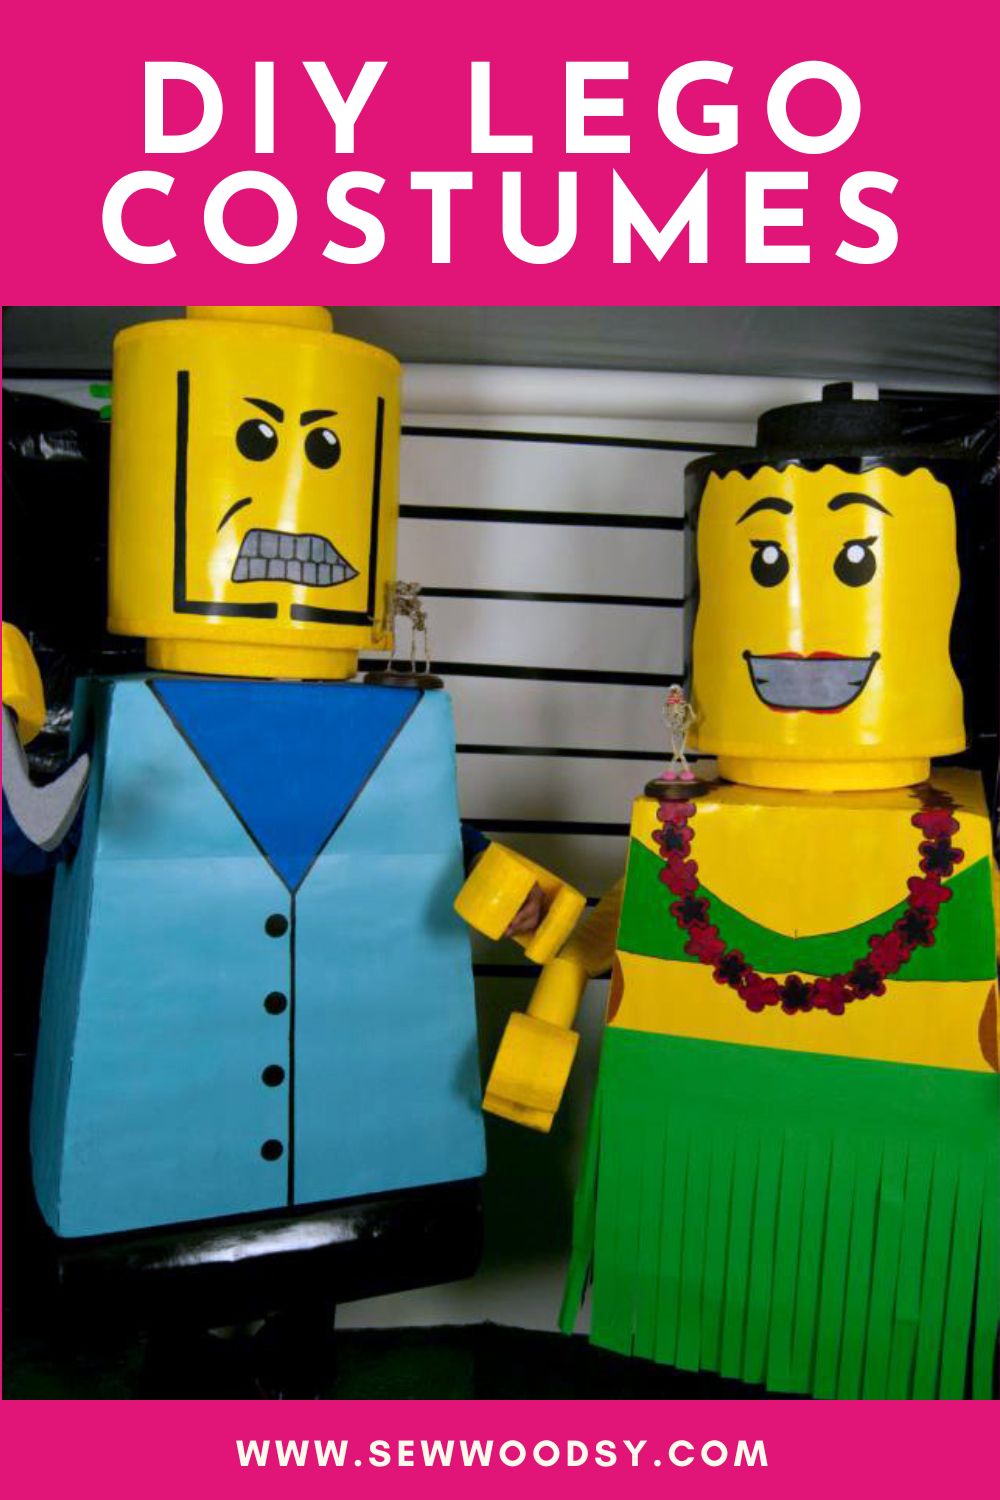 Man and woman lego with trophies on shoulders and text on image for Pinterest.